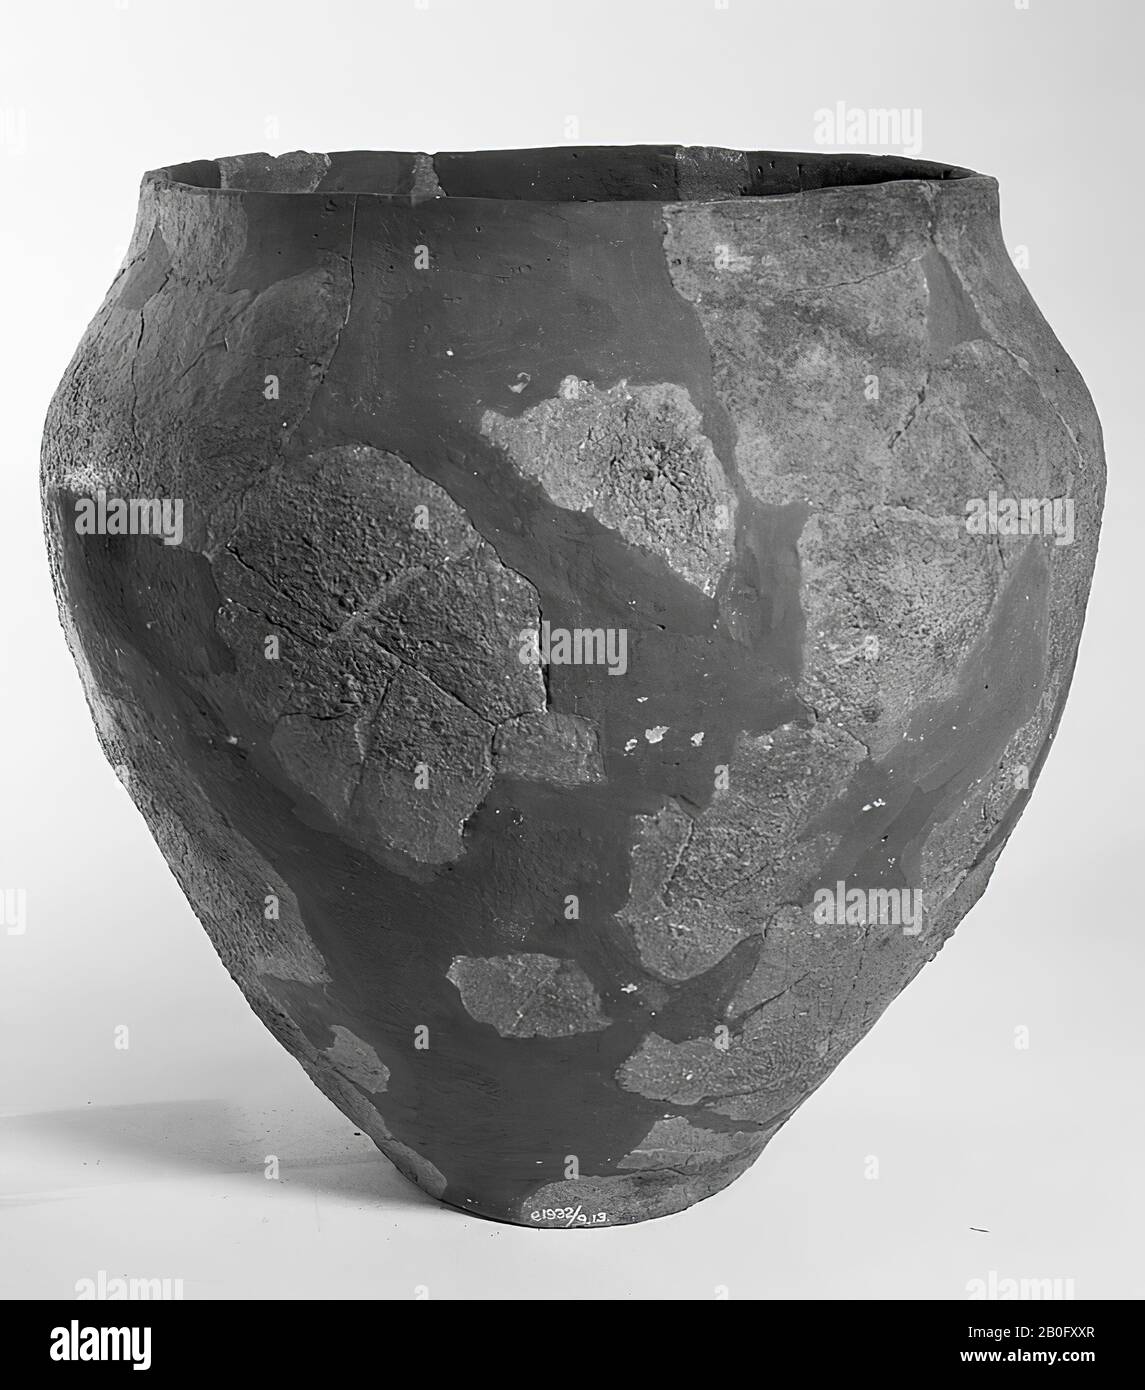 Germanic rough-walled urn of earthenware. Old bondings and additions, cracks. Contains cremated residues, urn, earthenware, h: 26.5 cm, diam: 27 cm, prehistory -800 Stock Photo